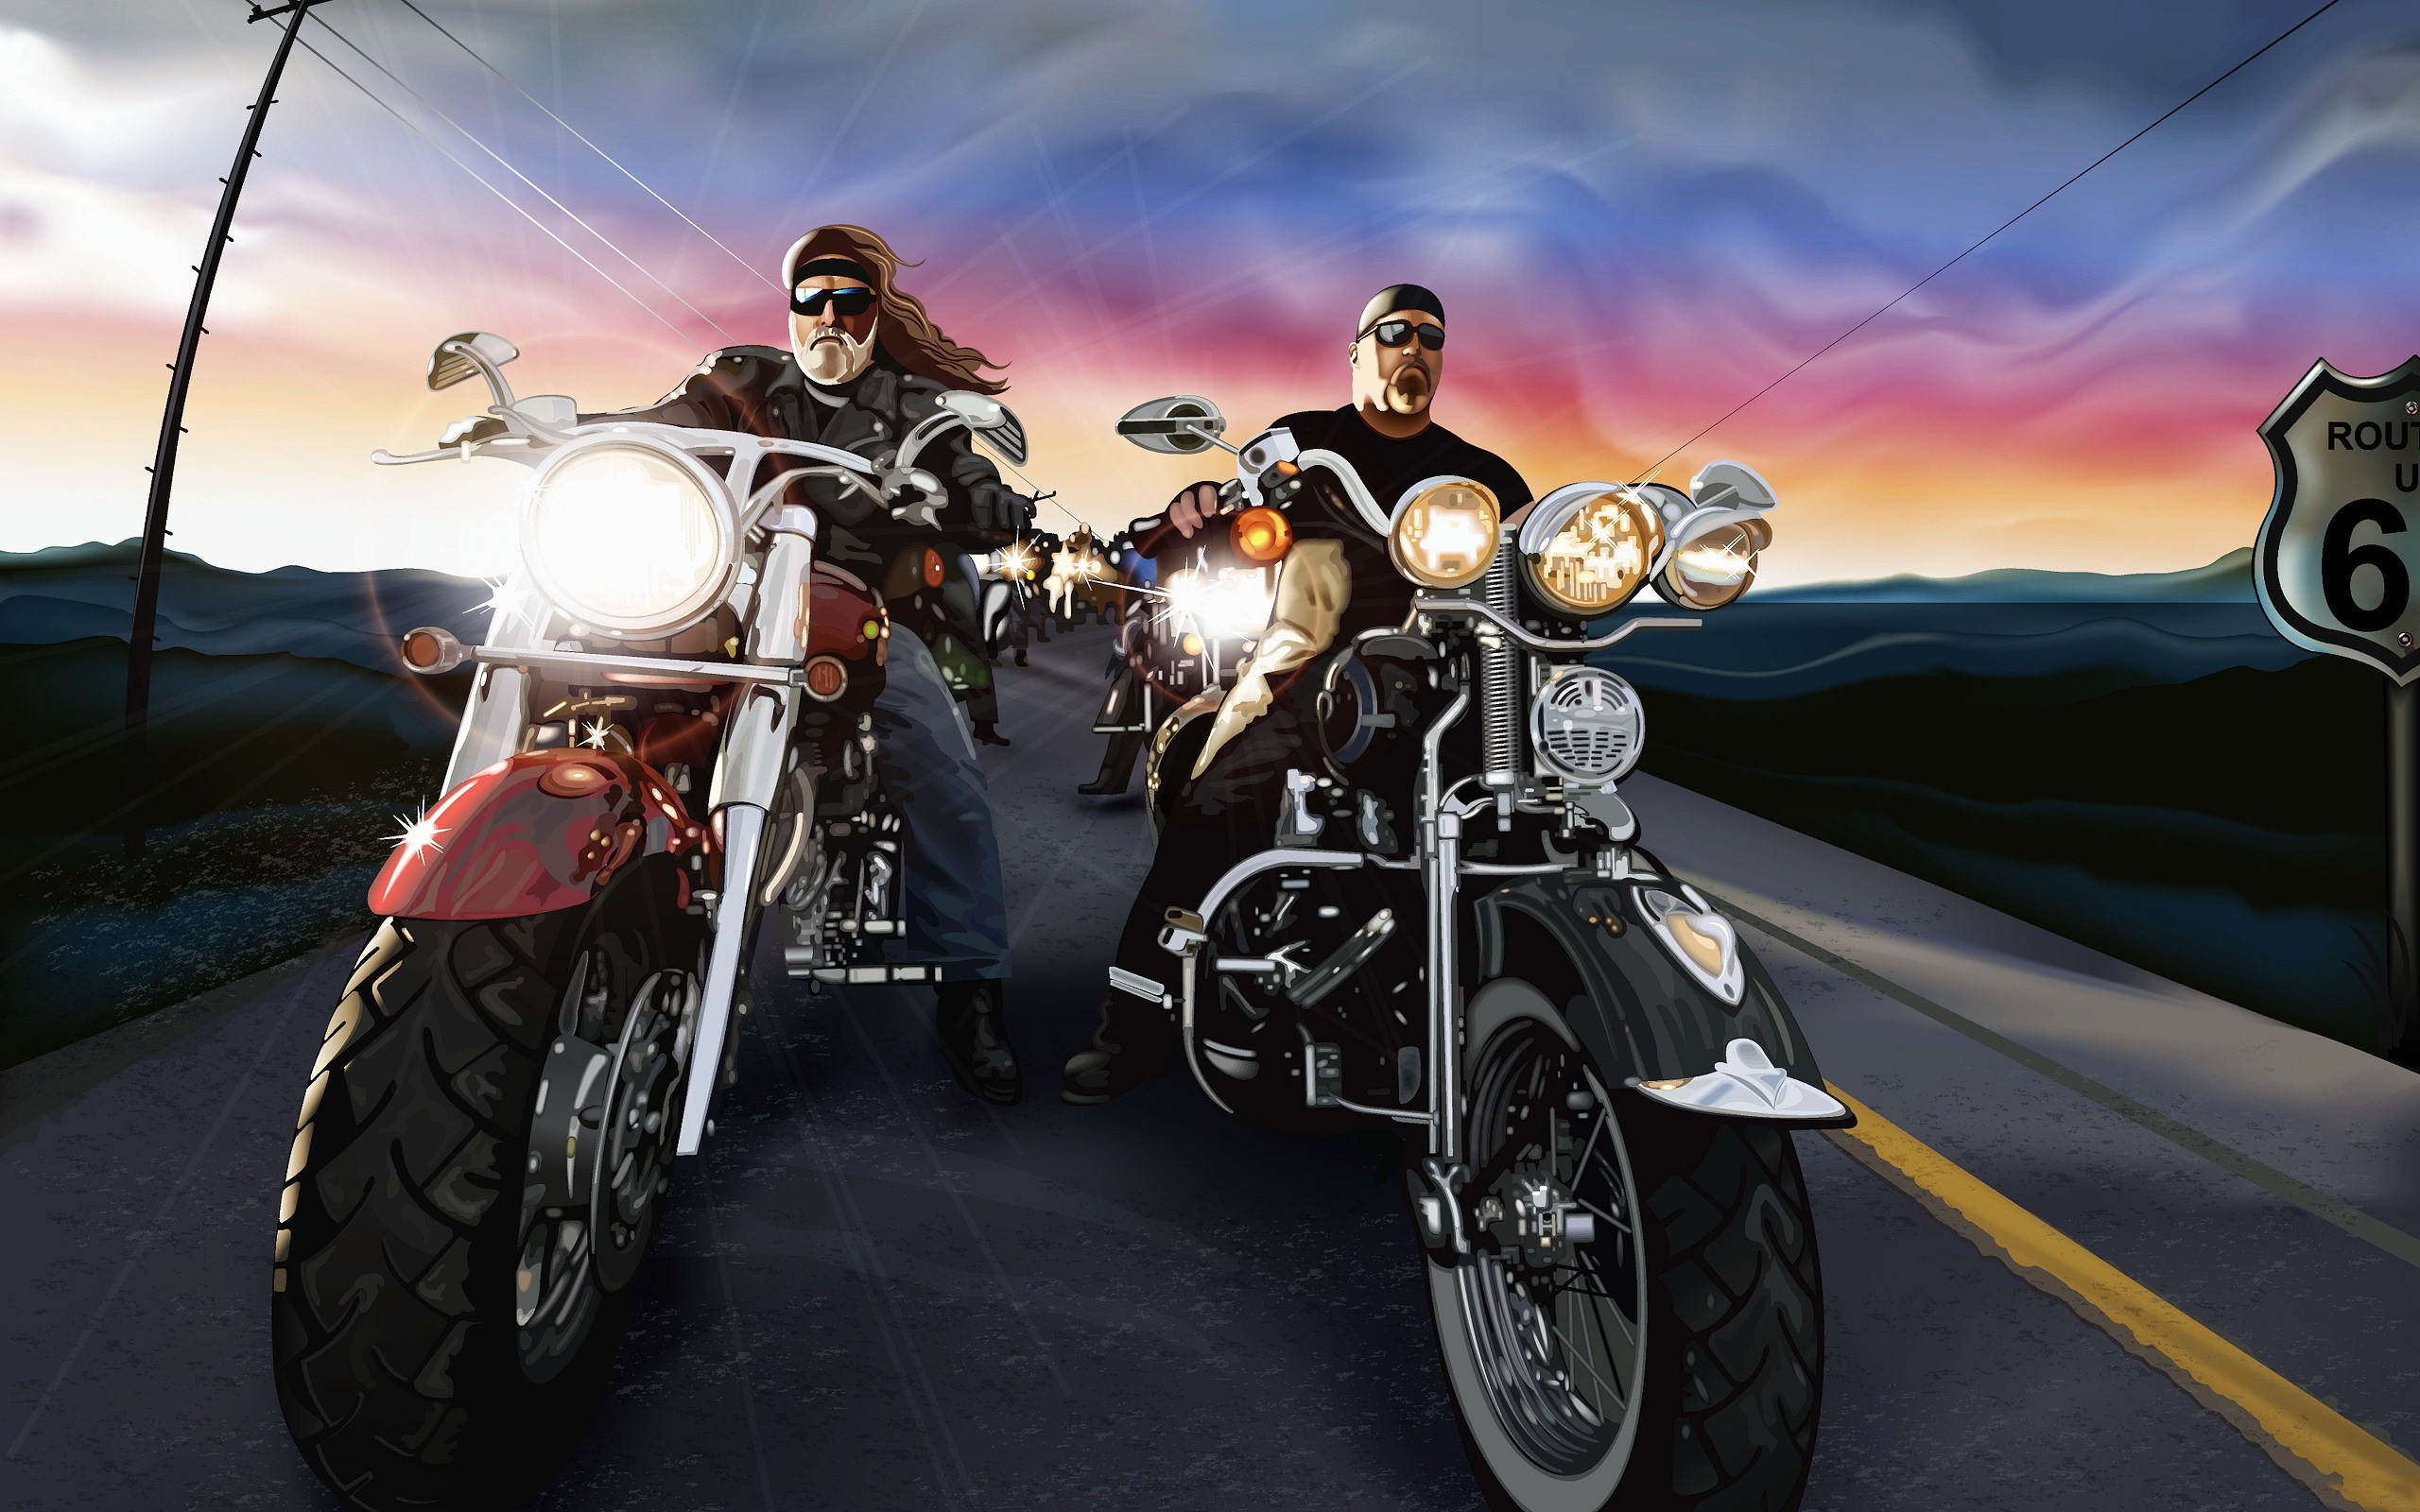 2560x1600 Choppers on Route 66 Wallpaper | Disciples Motorcycle Ministries